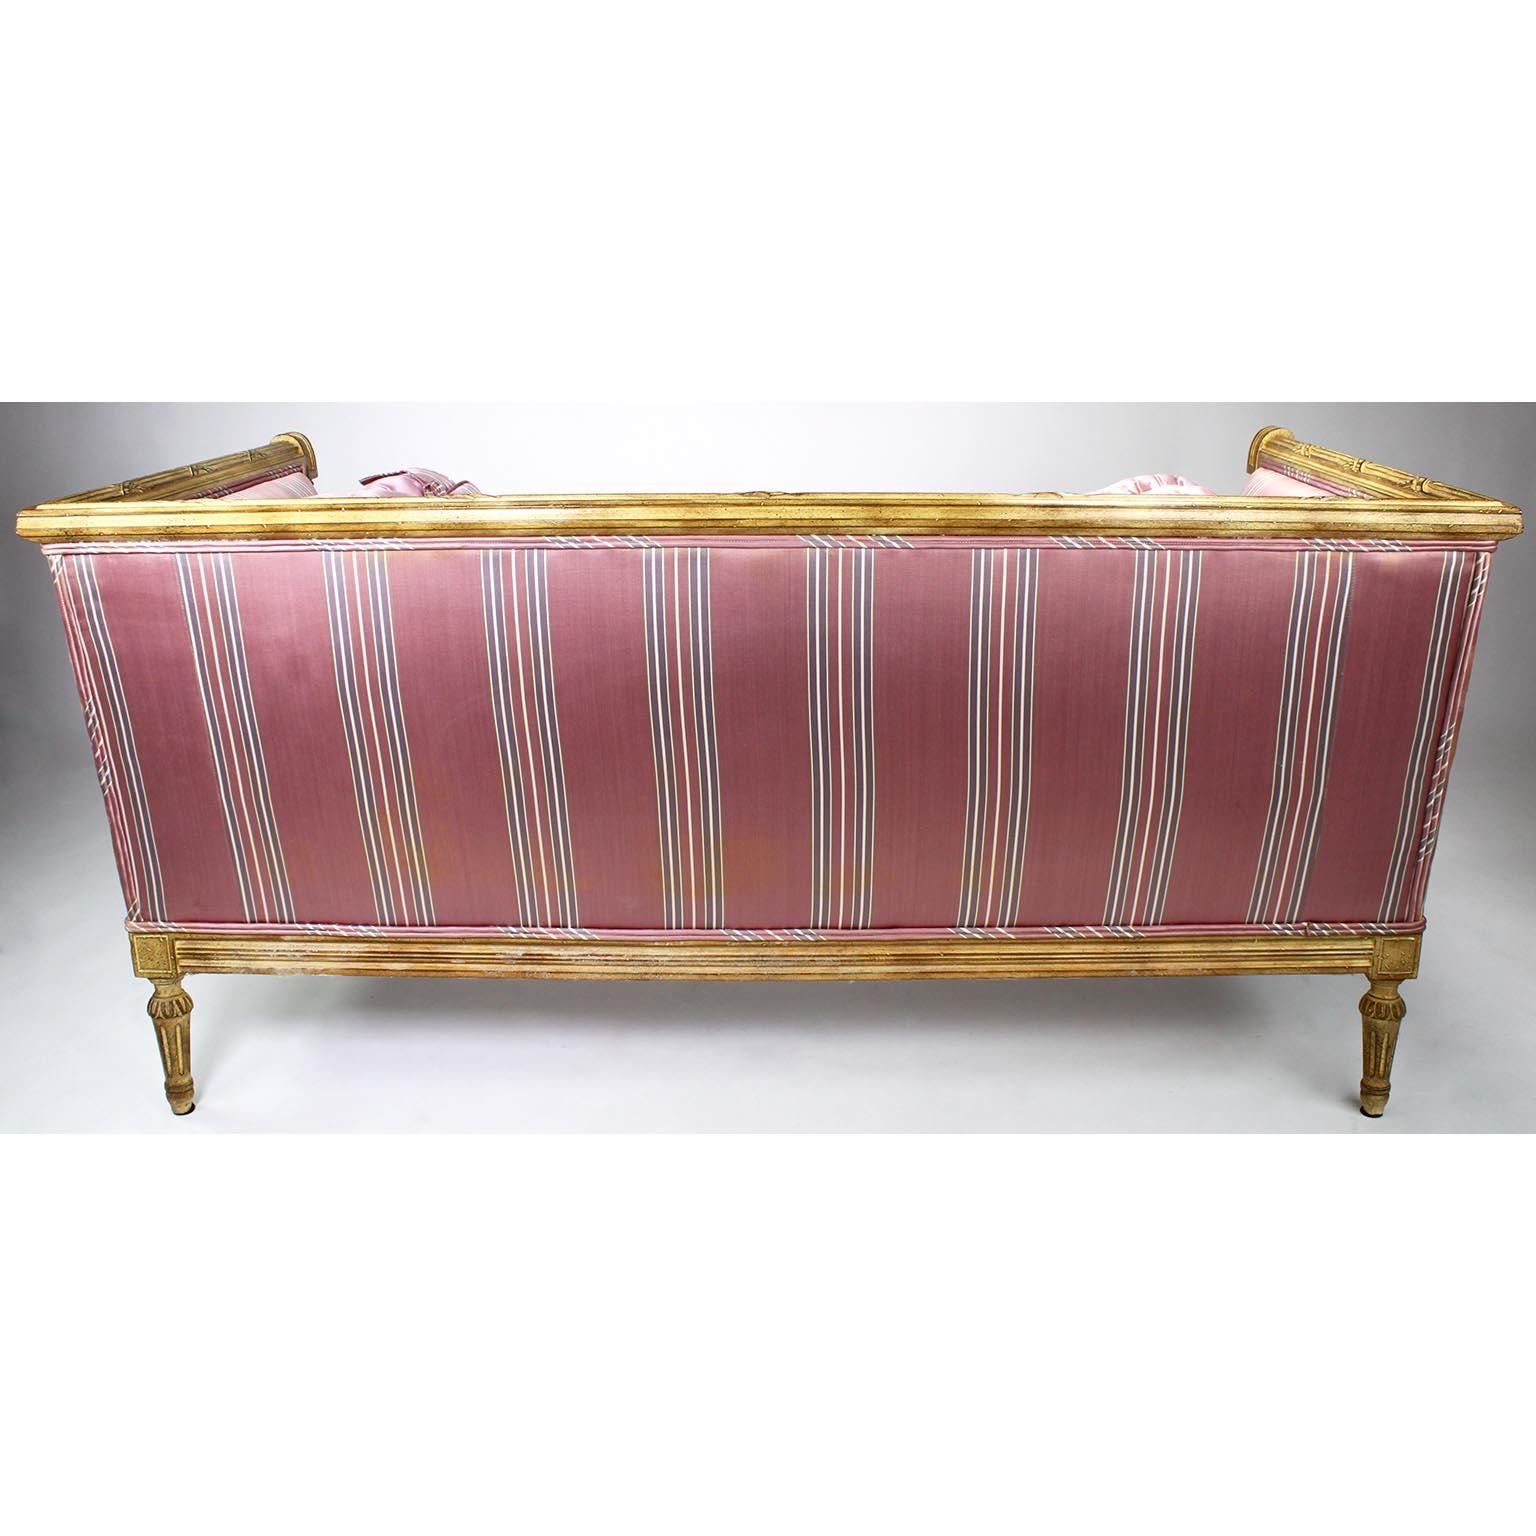 Pair of French Louis XVI Style Carved-Wood Cream-Lacquered Settees, Jansen Attr. For Sale 4